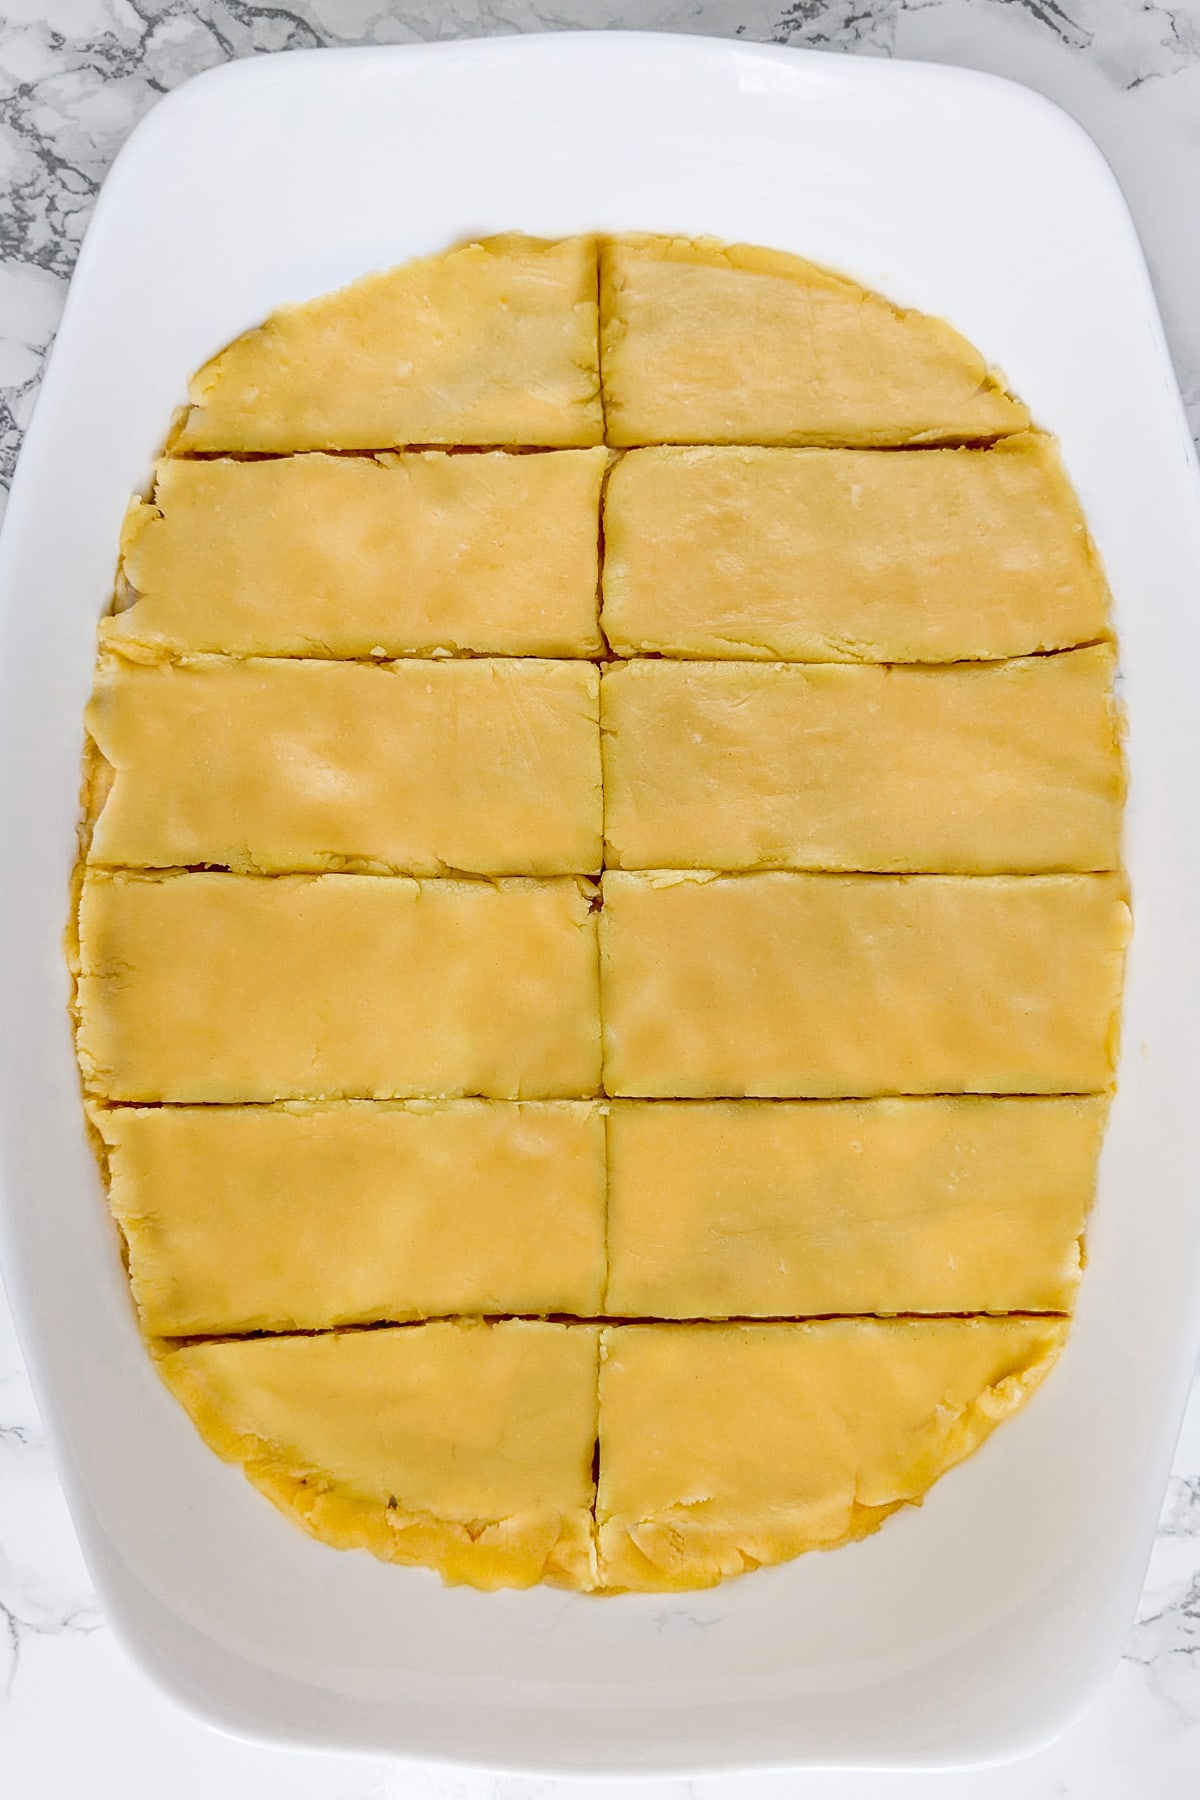 Top view of sliced apple slice cake on a white marble table.